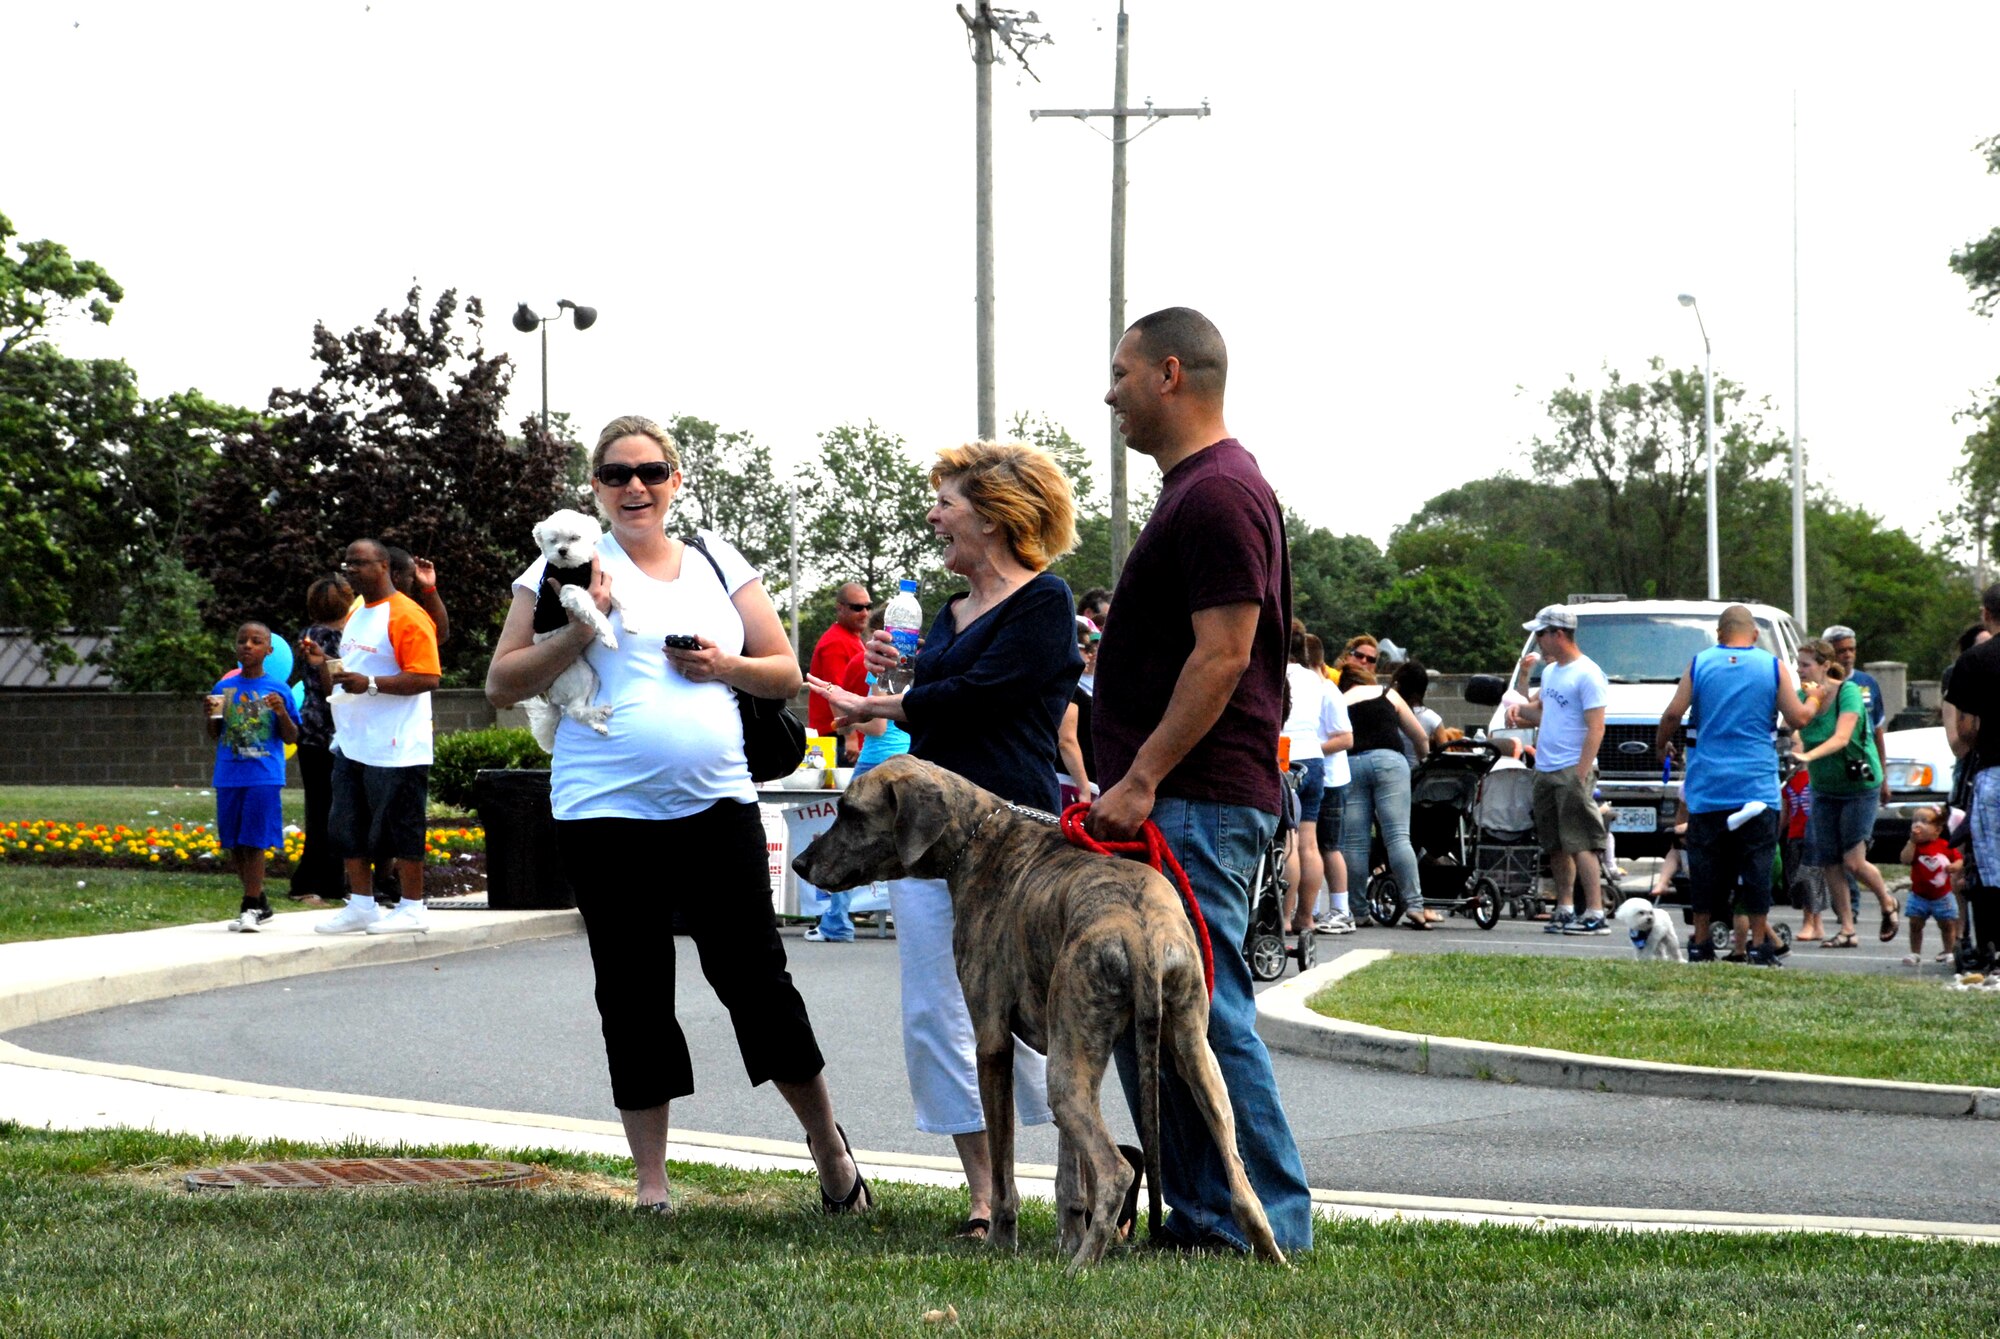 Airman 1st Class Lori Campbell, 436th Logistics Readiness Squadron, her dog Rascal and her mother Shirley Lee, talk with Master Sgt. Clarence DePass, 436th LRS and his dog Sage at the Pet Extravaganza and Block Party at Eagle Heights May 8. The Pet Extravaganza gave many pet owners a chance to come out and meet other pet owners and socialize their pets.(U.S. Air Force photo/Airman 1st Class Matthew Hubby)